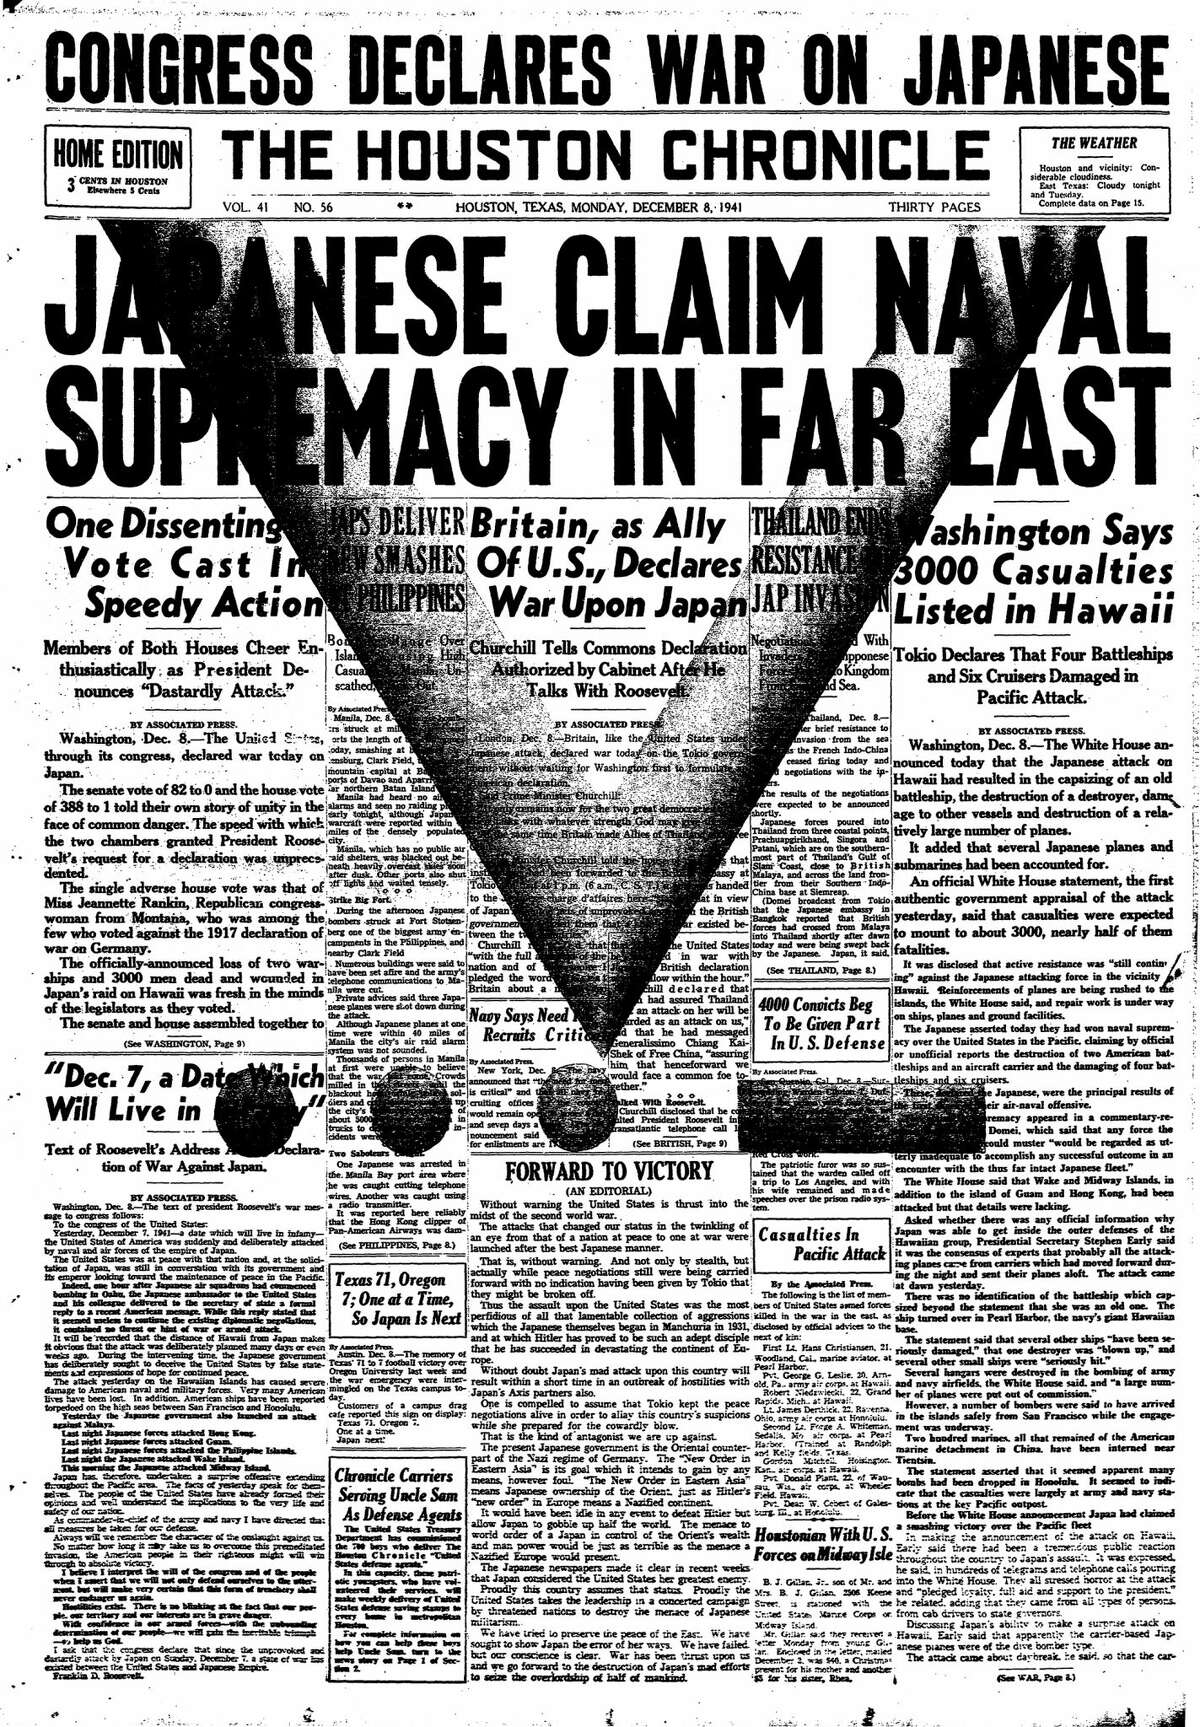 Houston Chronicle front page from Dec. 8, 1941.